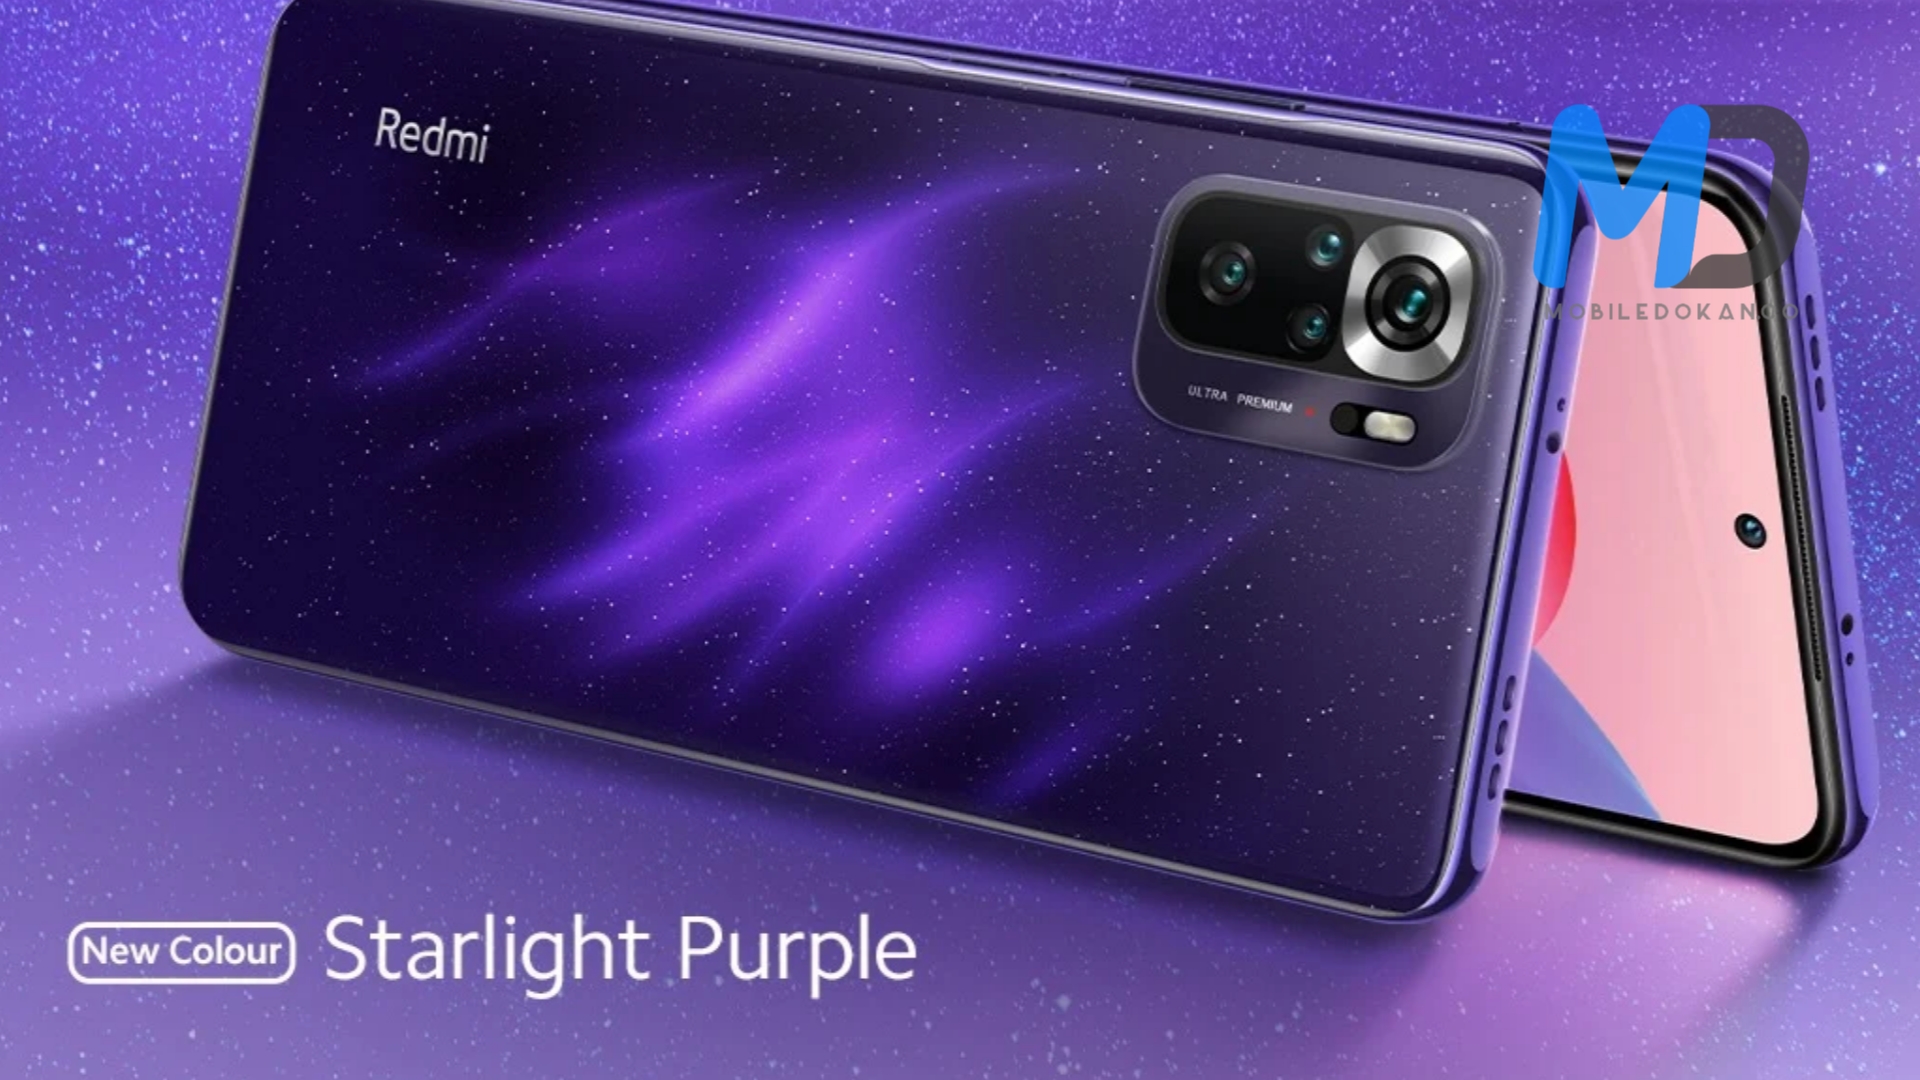 Redmi Note 10S Starlight Purple India launch teased officially